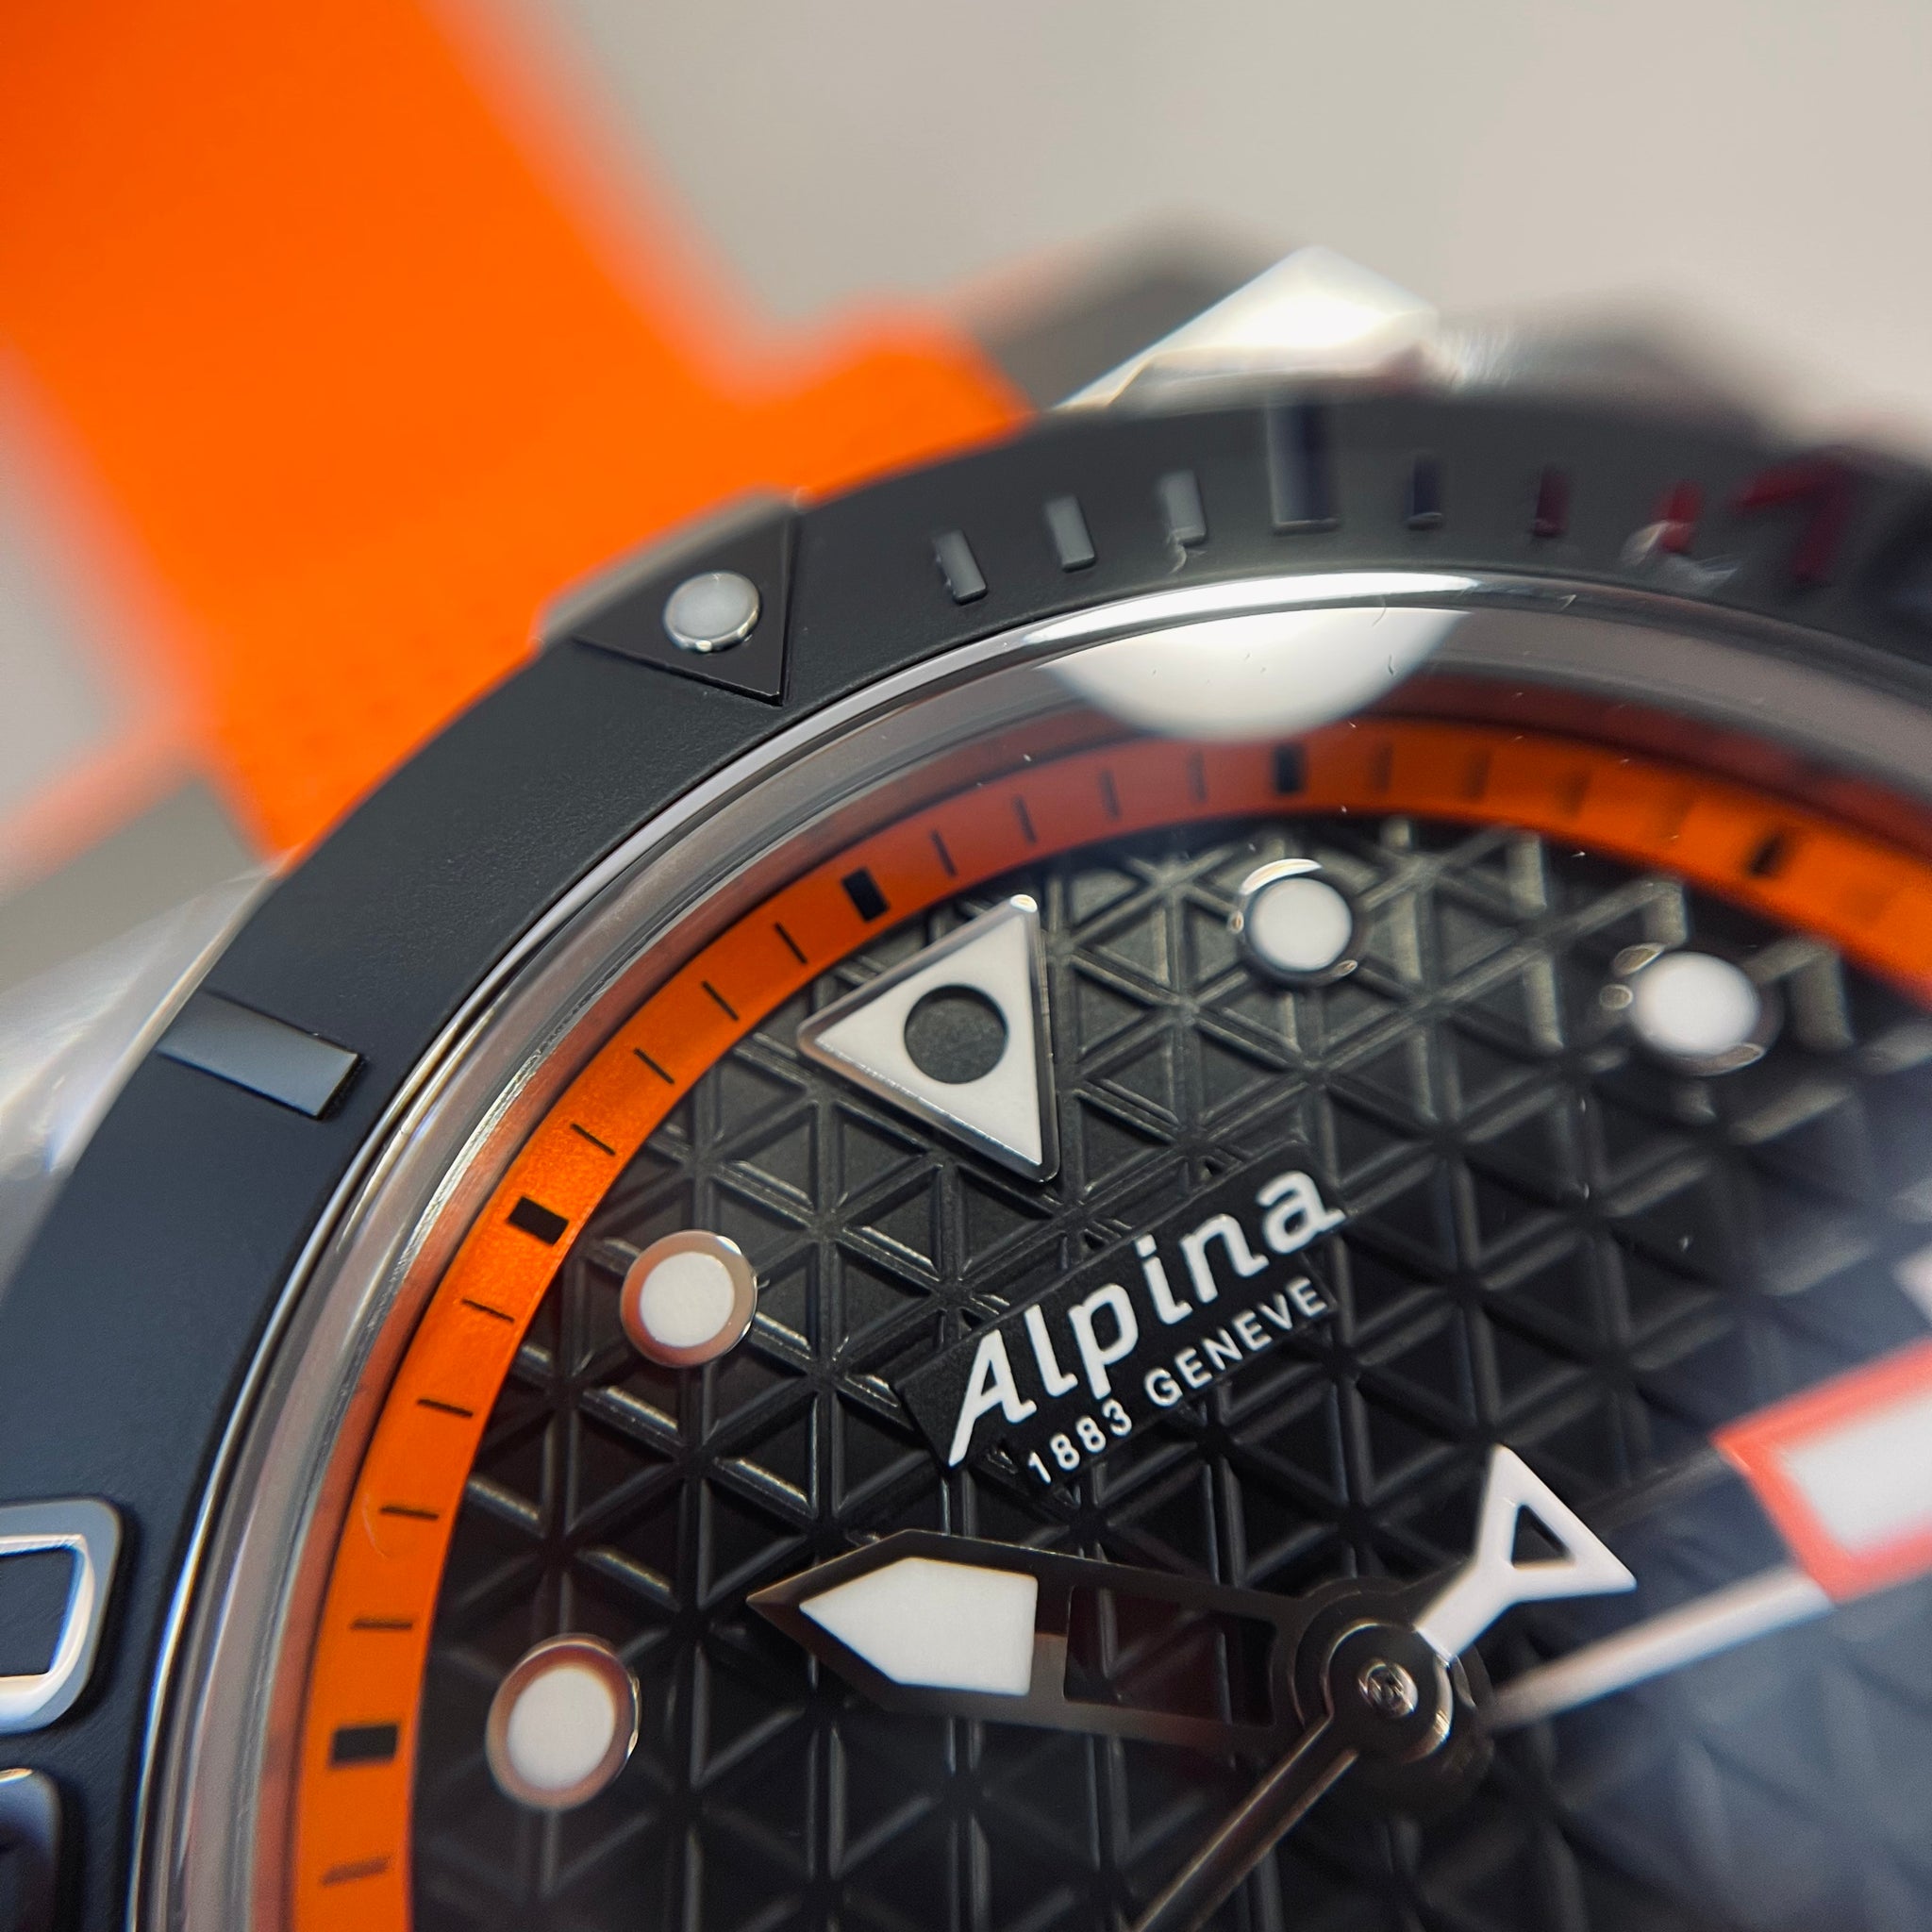 Alpina - SEASTRONG DIVER EXTREME AUTOMATIC